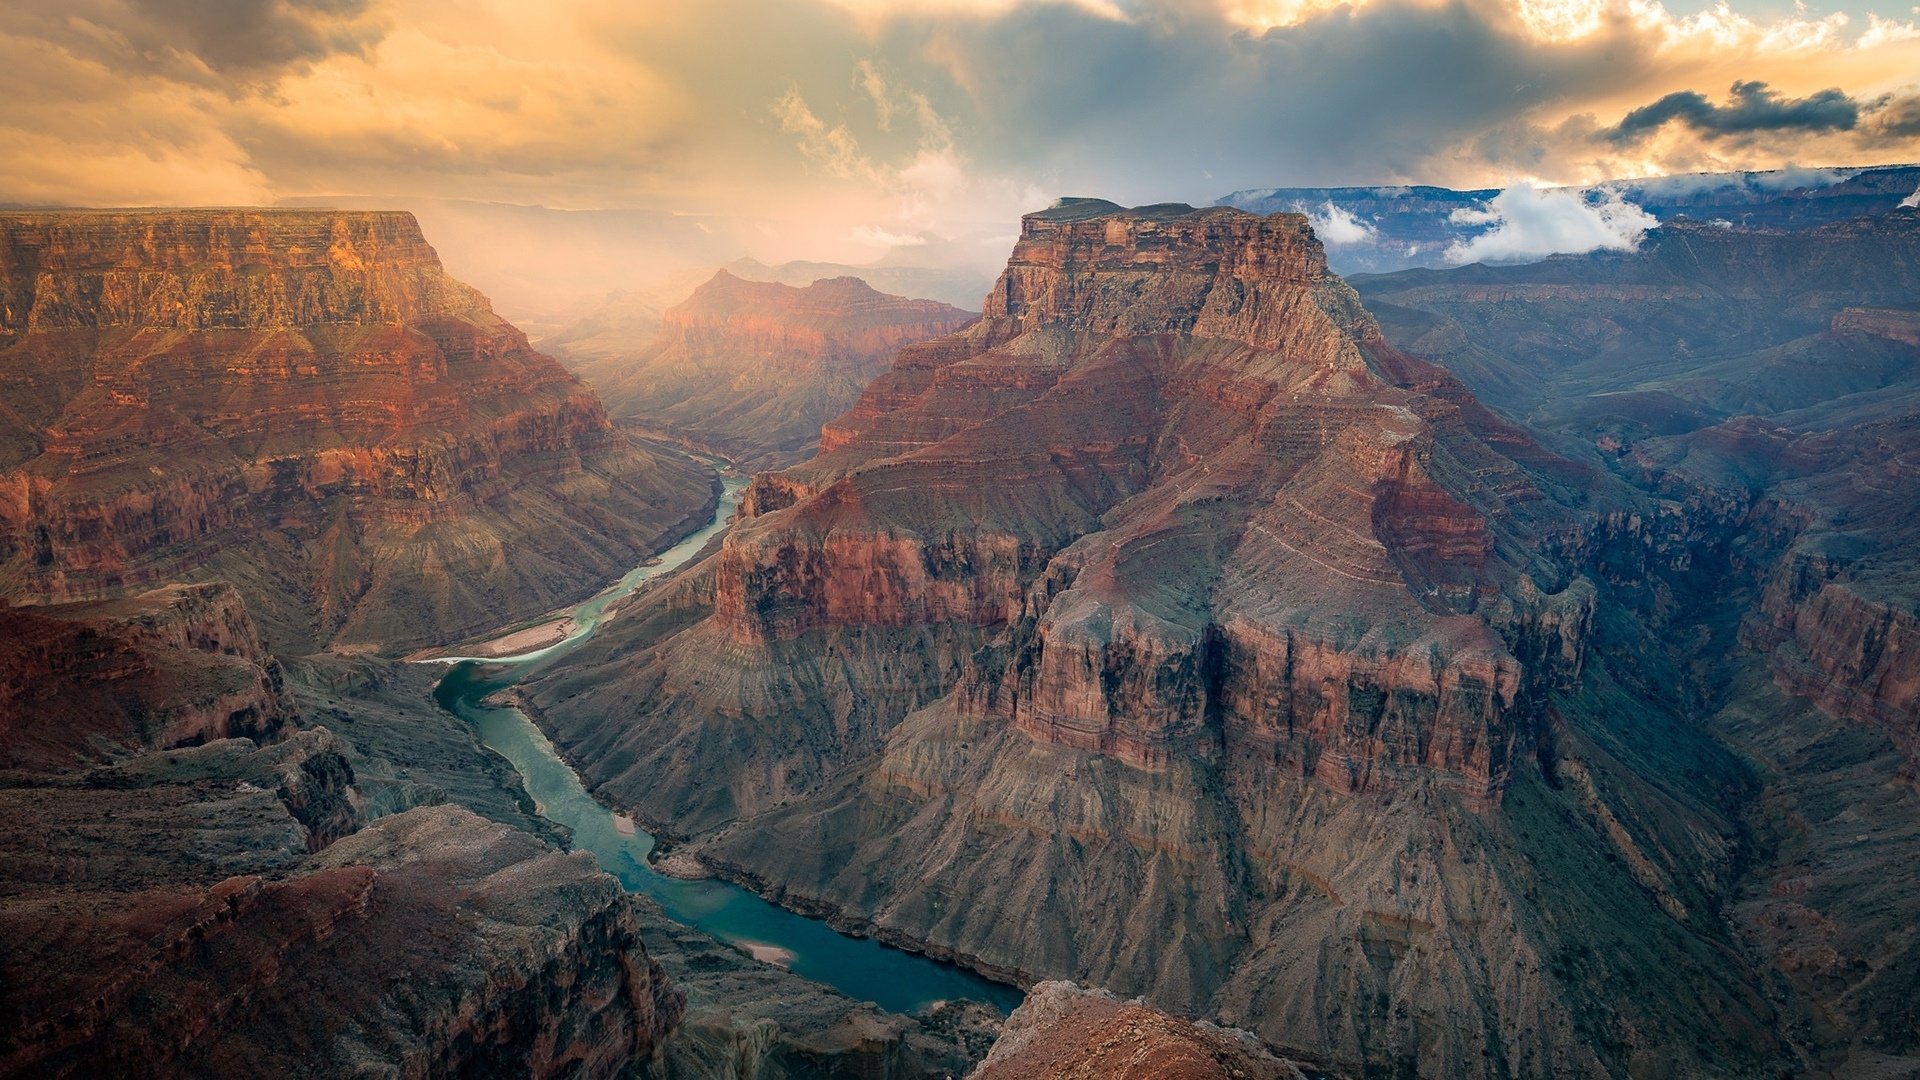 Colorado River In The Grand Canyon By David Swindler